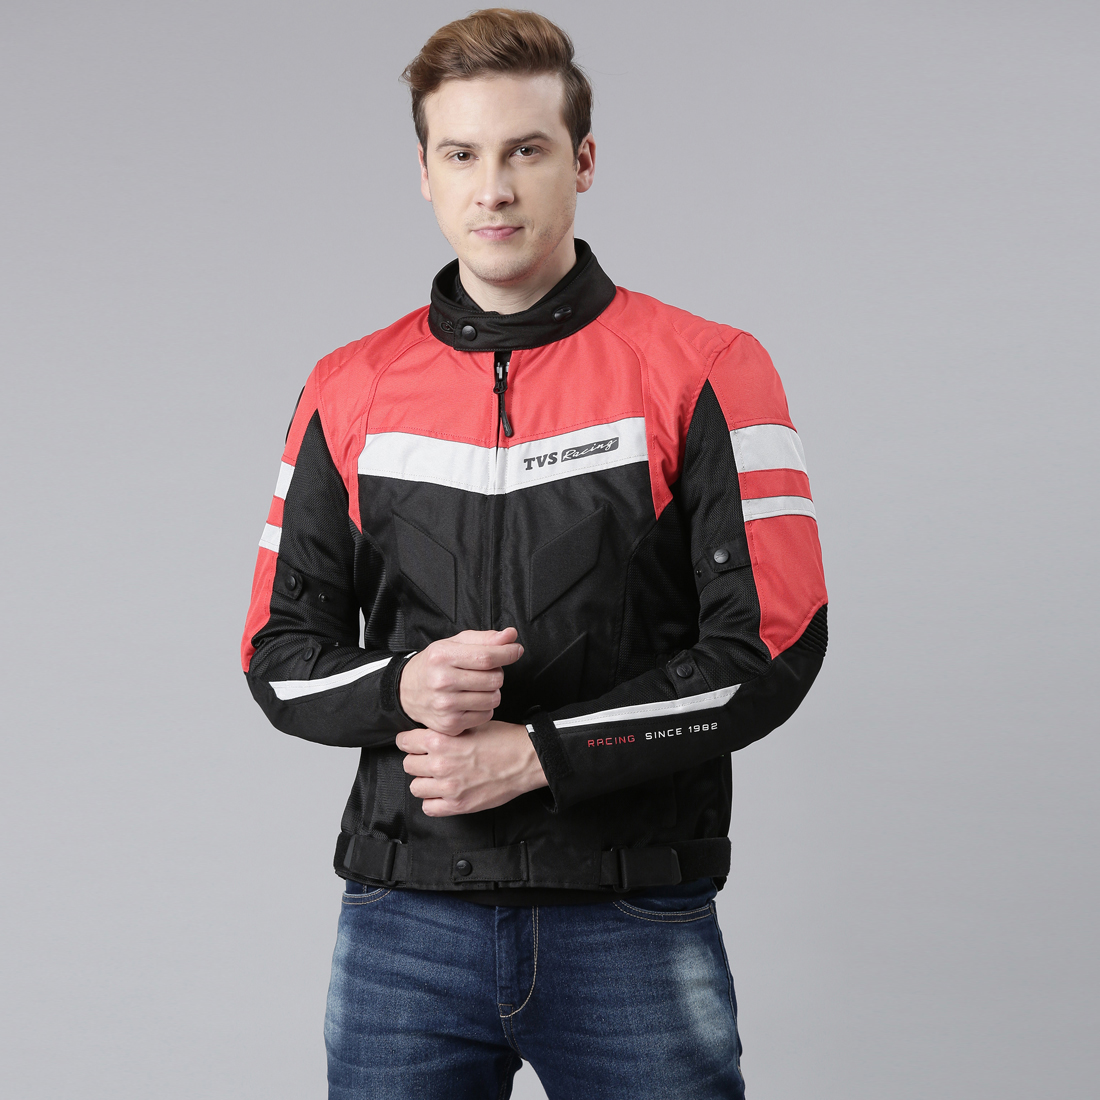 TVS Racing Aegis 3-Layer Riding Jacket for Men- All Weather Adaptability, CE Level 2 Armour Protection-Premium Bike Jackets for Bikers (Red) Online at Best Prices TVS Motor Company